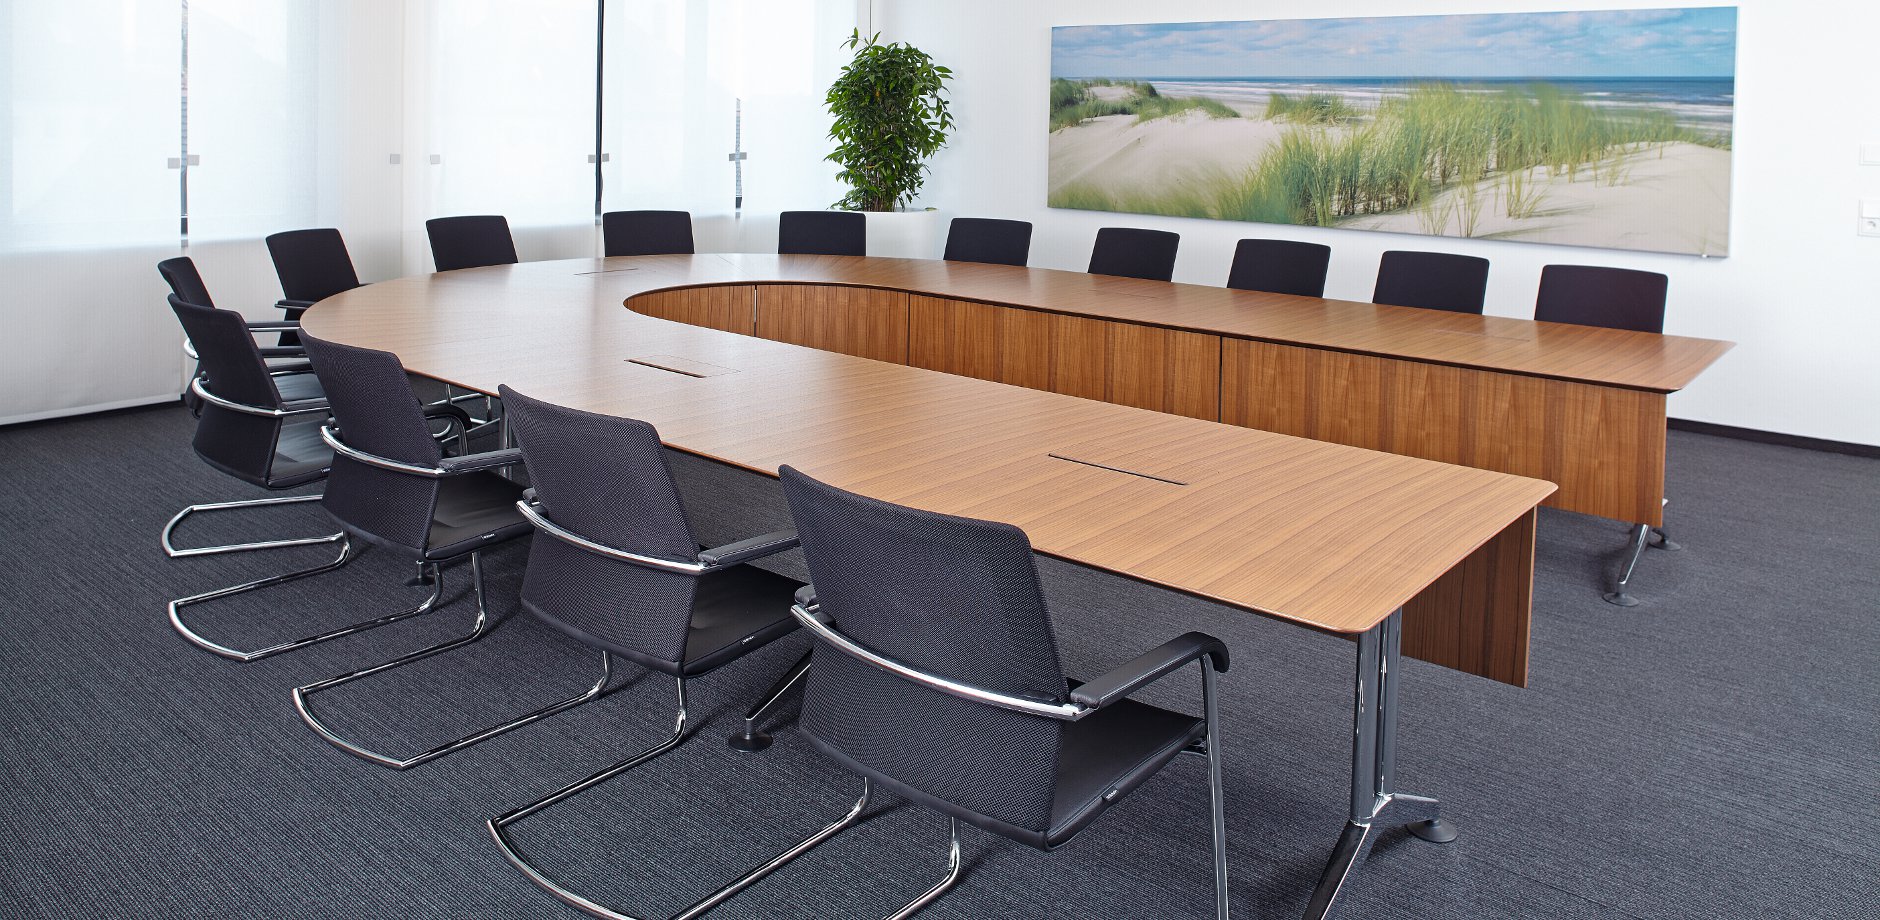 Ipsen Pharma, Germany, ON cantilever chair and Logon conference table by Wilkhahn